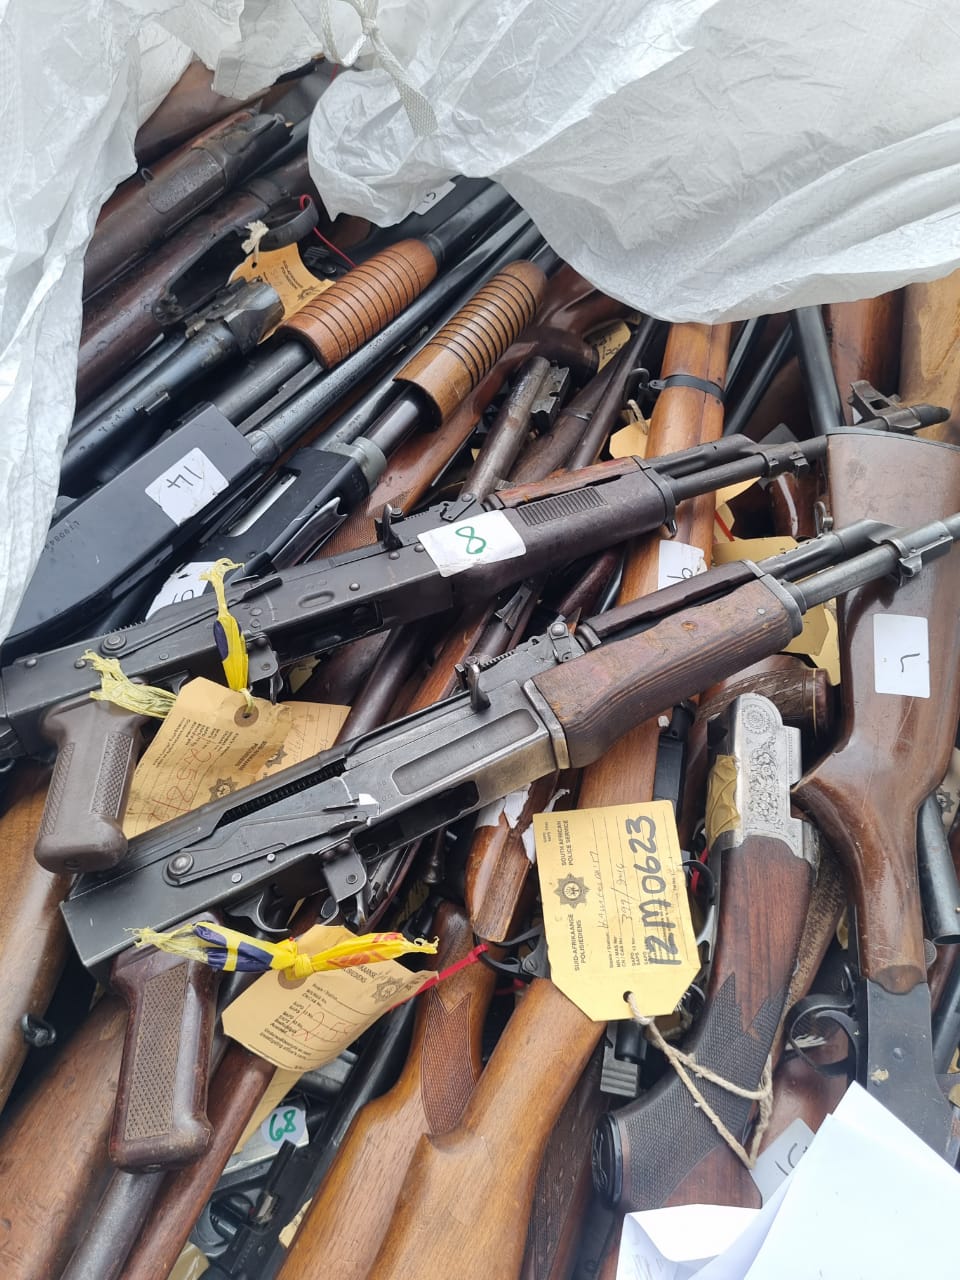 SAPS will destroy over 18 000 firearms, firearm parts and ammunition in Vanderbijlpark